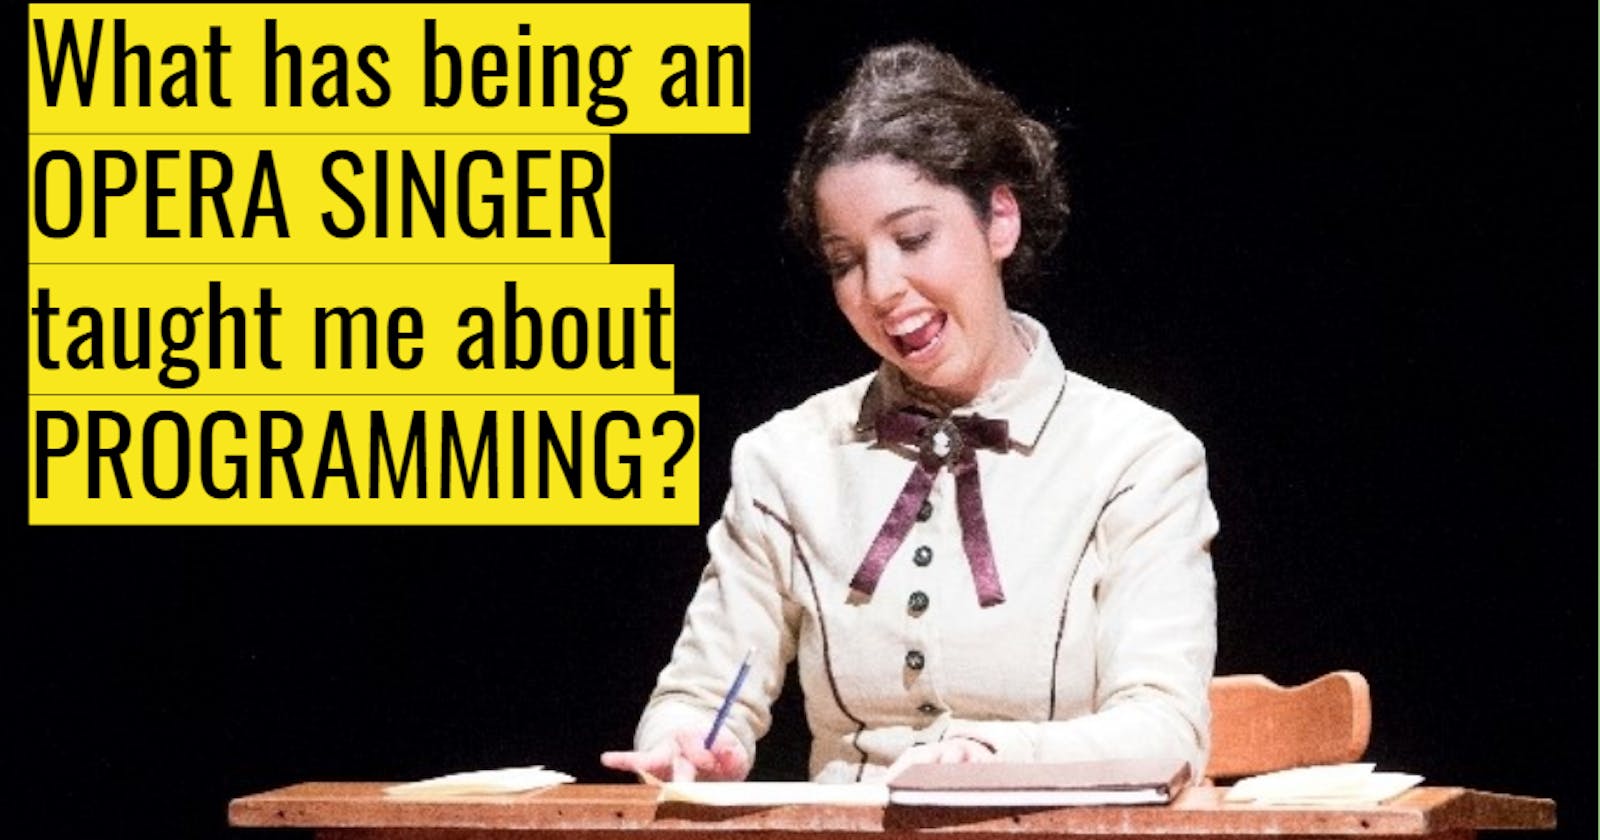 What has being an opera singer taught me about programming?